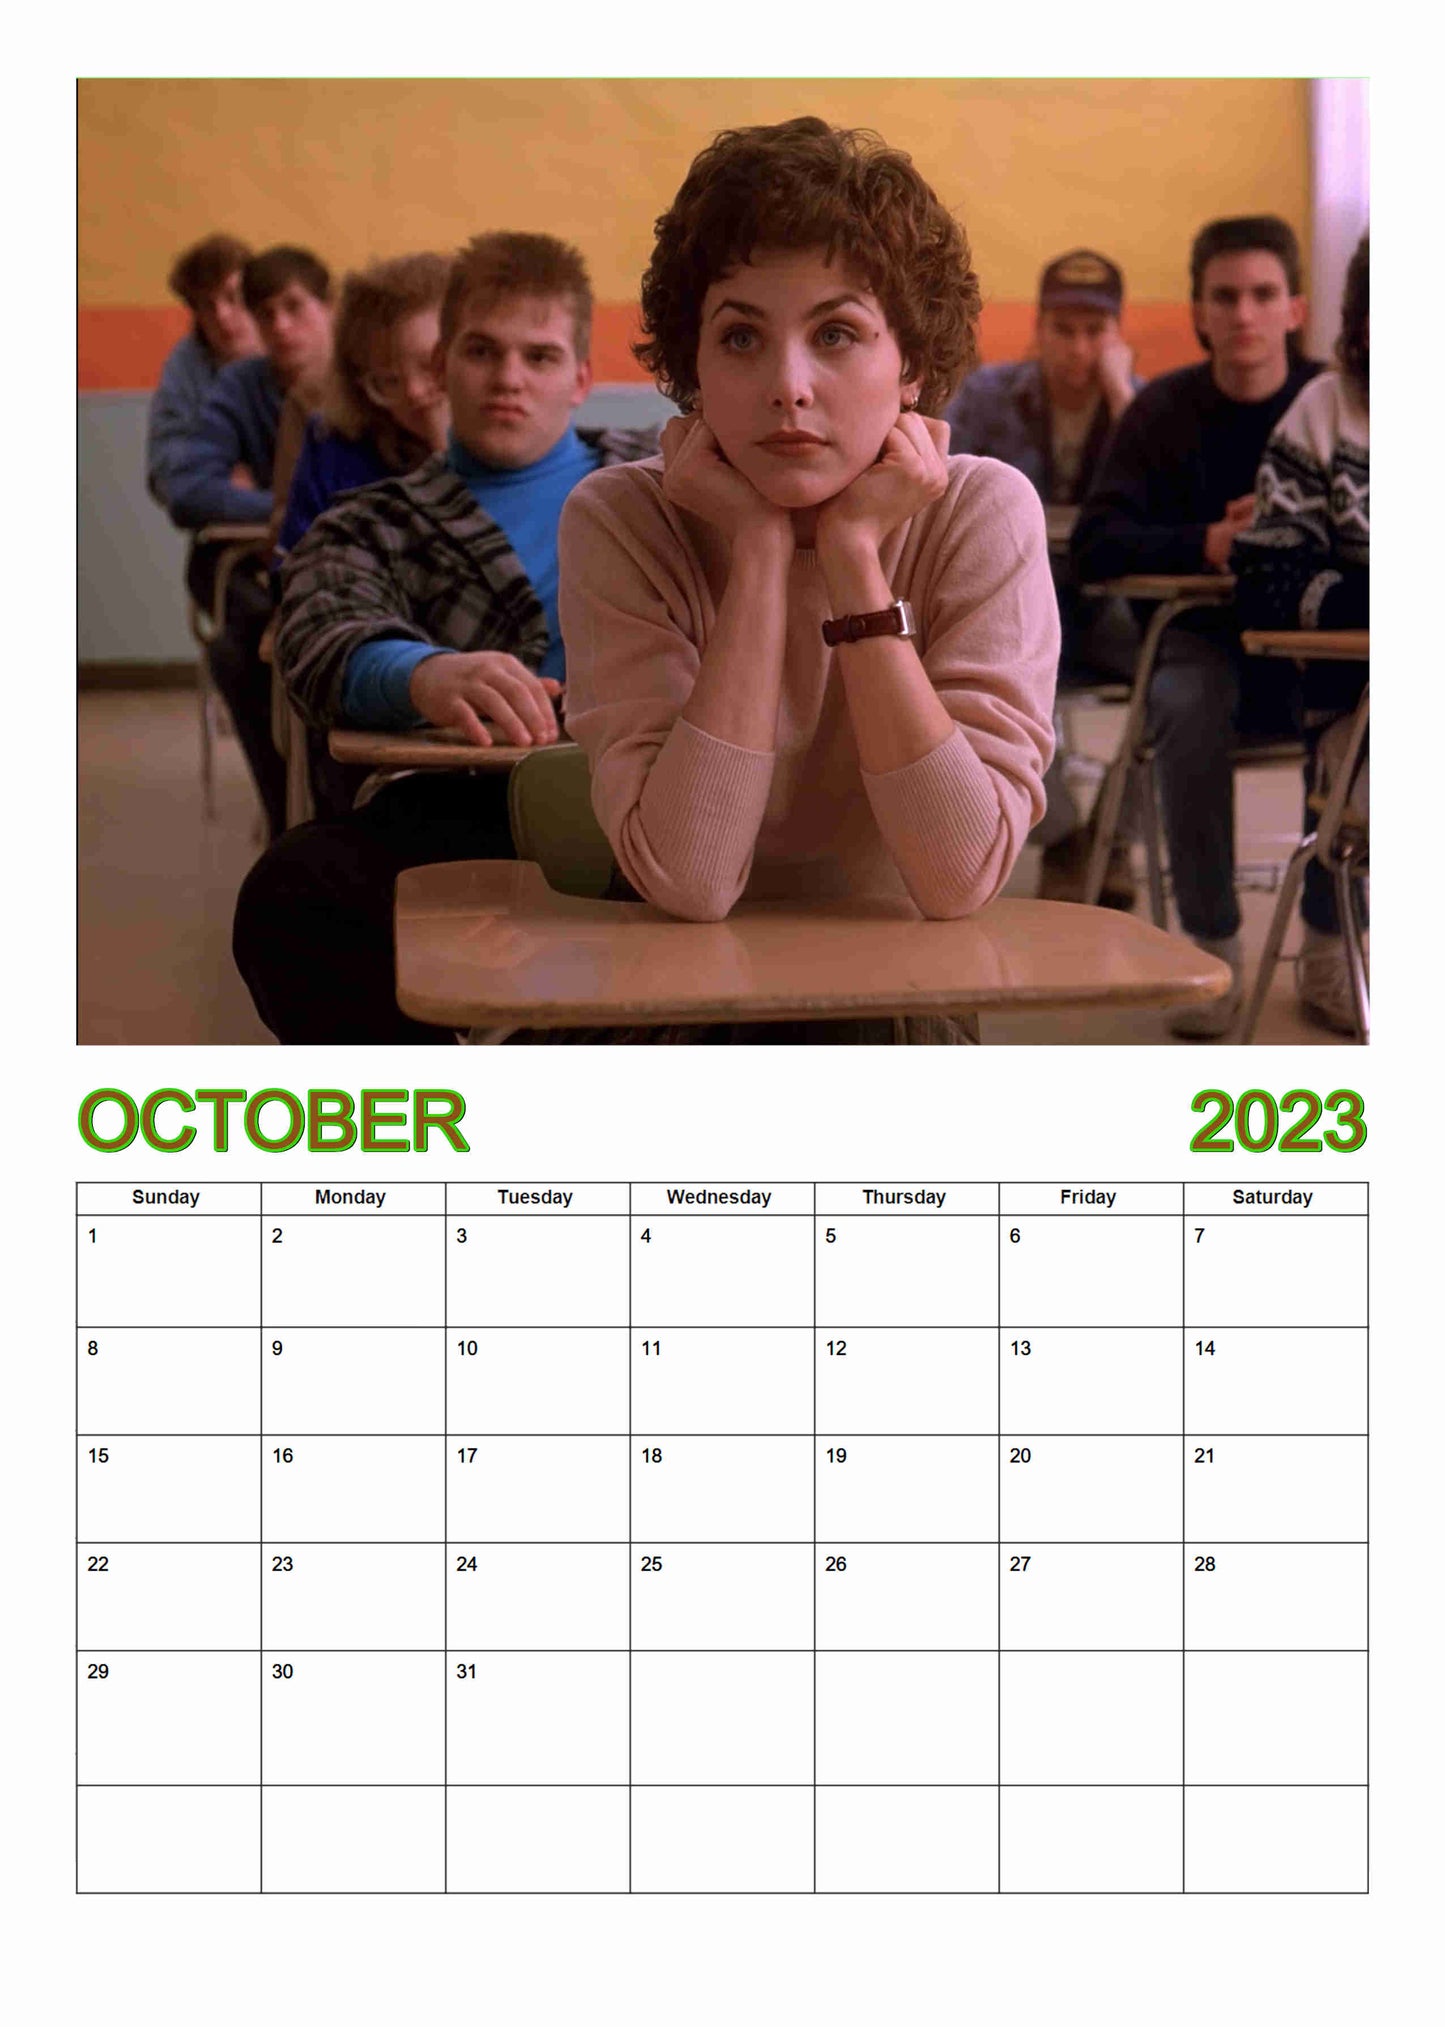 Preview of the month of October featuring Audrey Horne